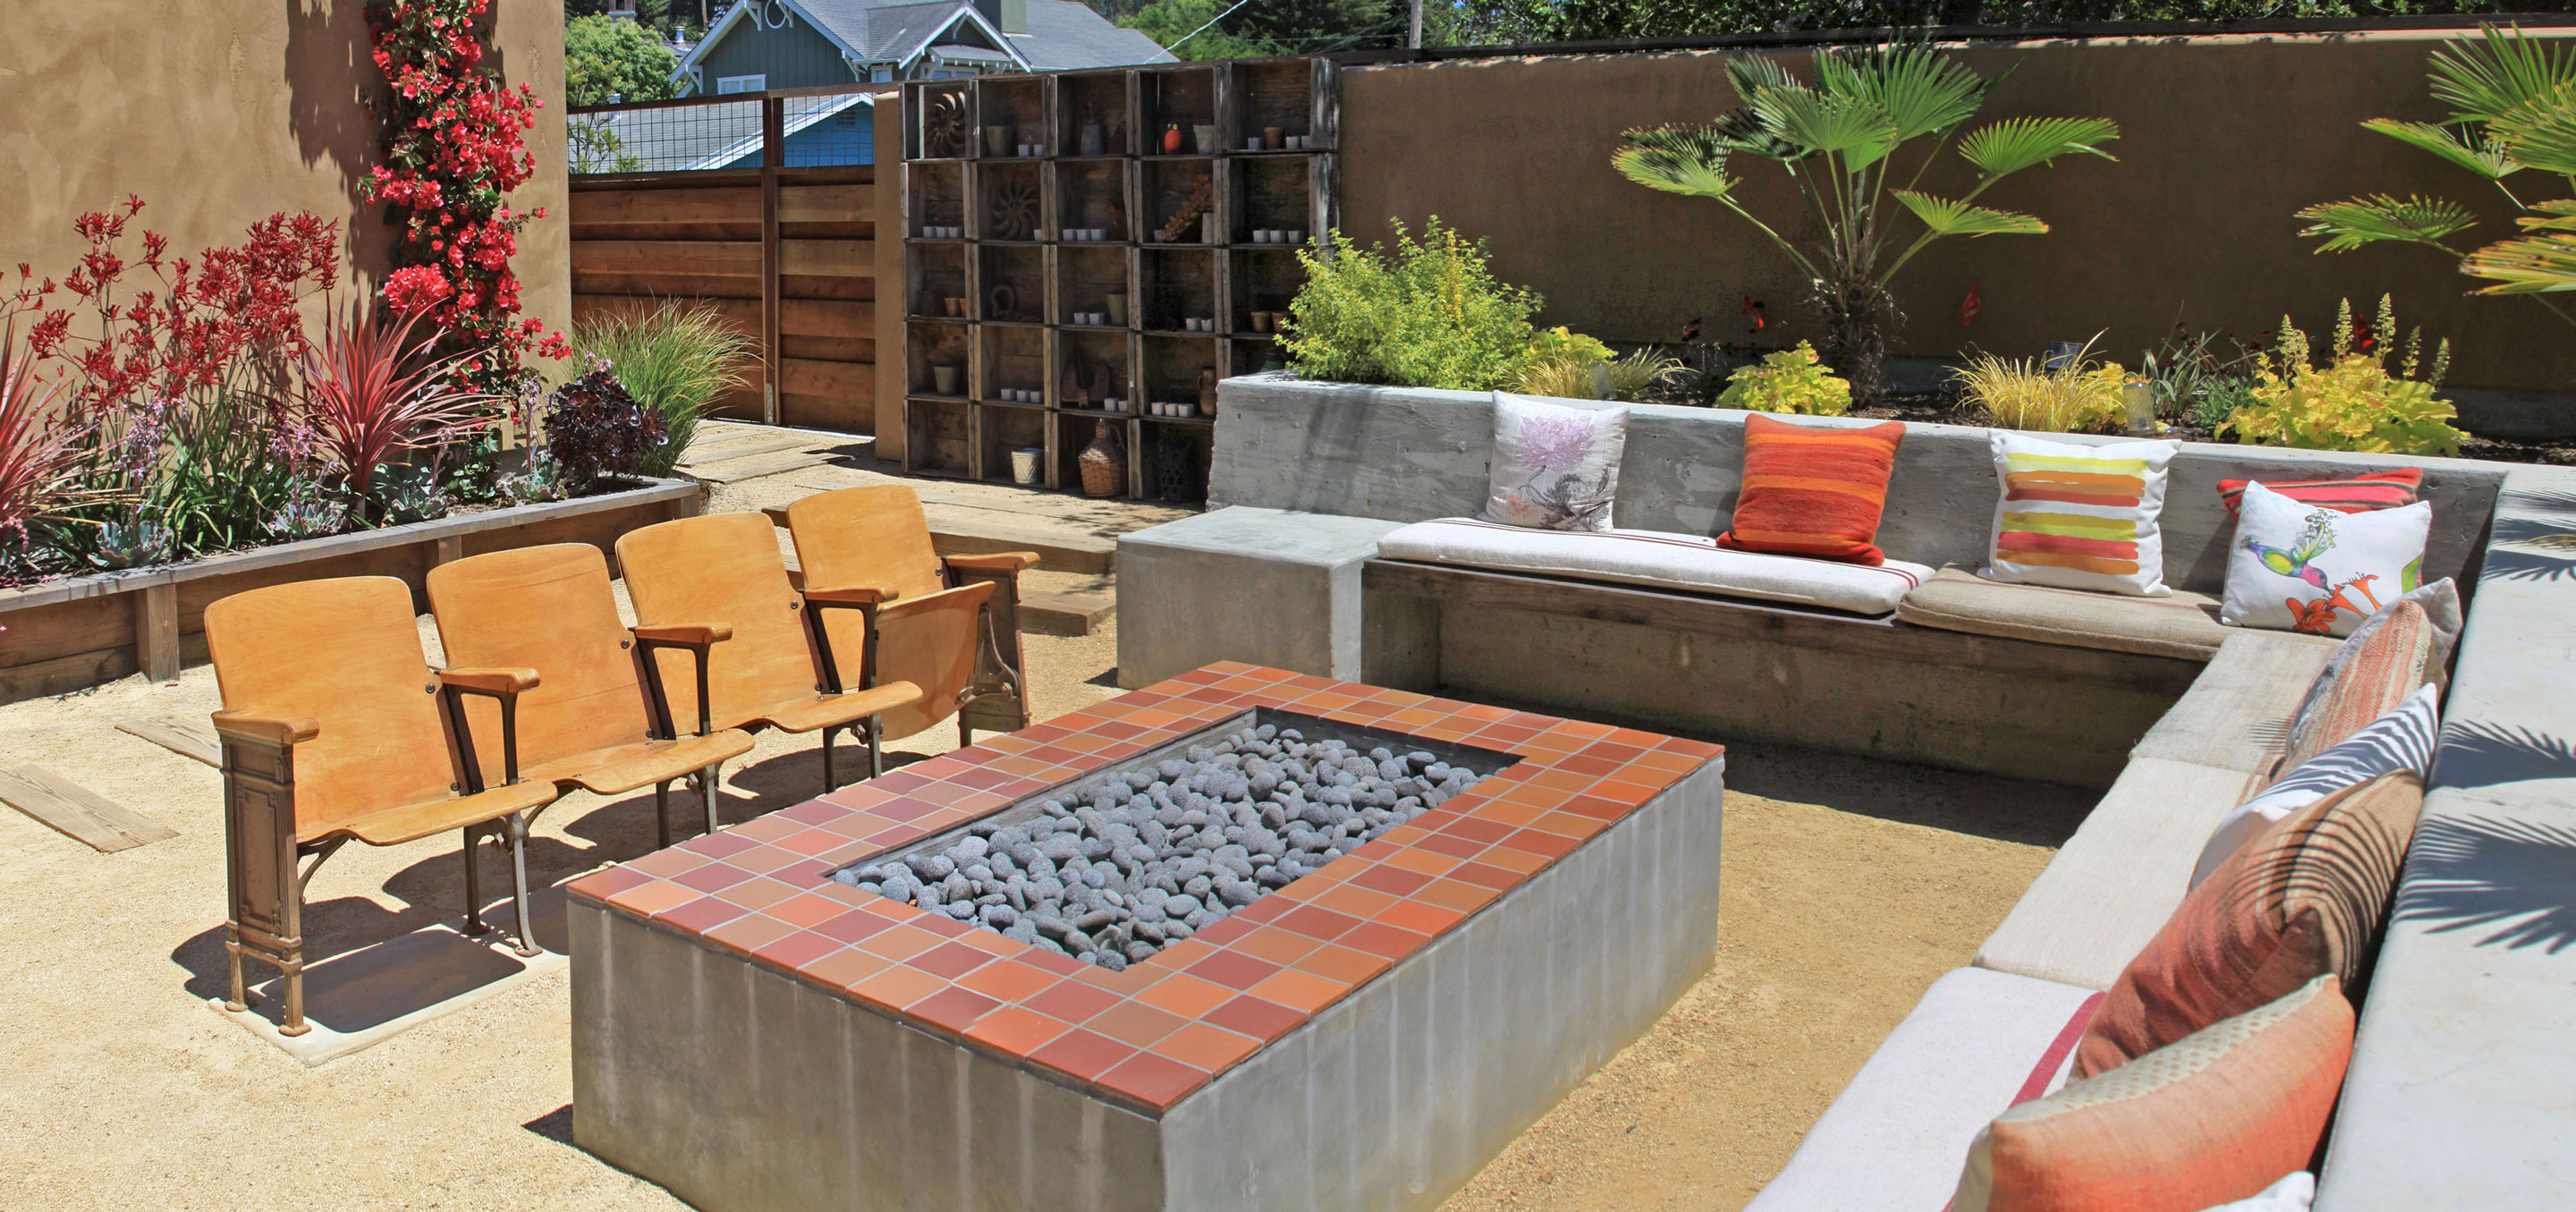 Outdoor Kitchen Ssa Landscape Architects, Spanish Style Outdoor Fire Pit